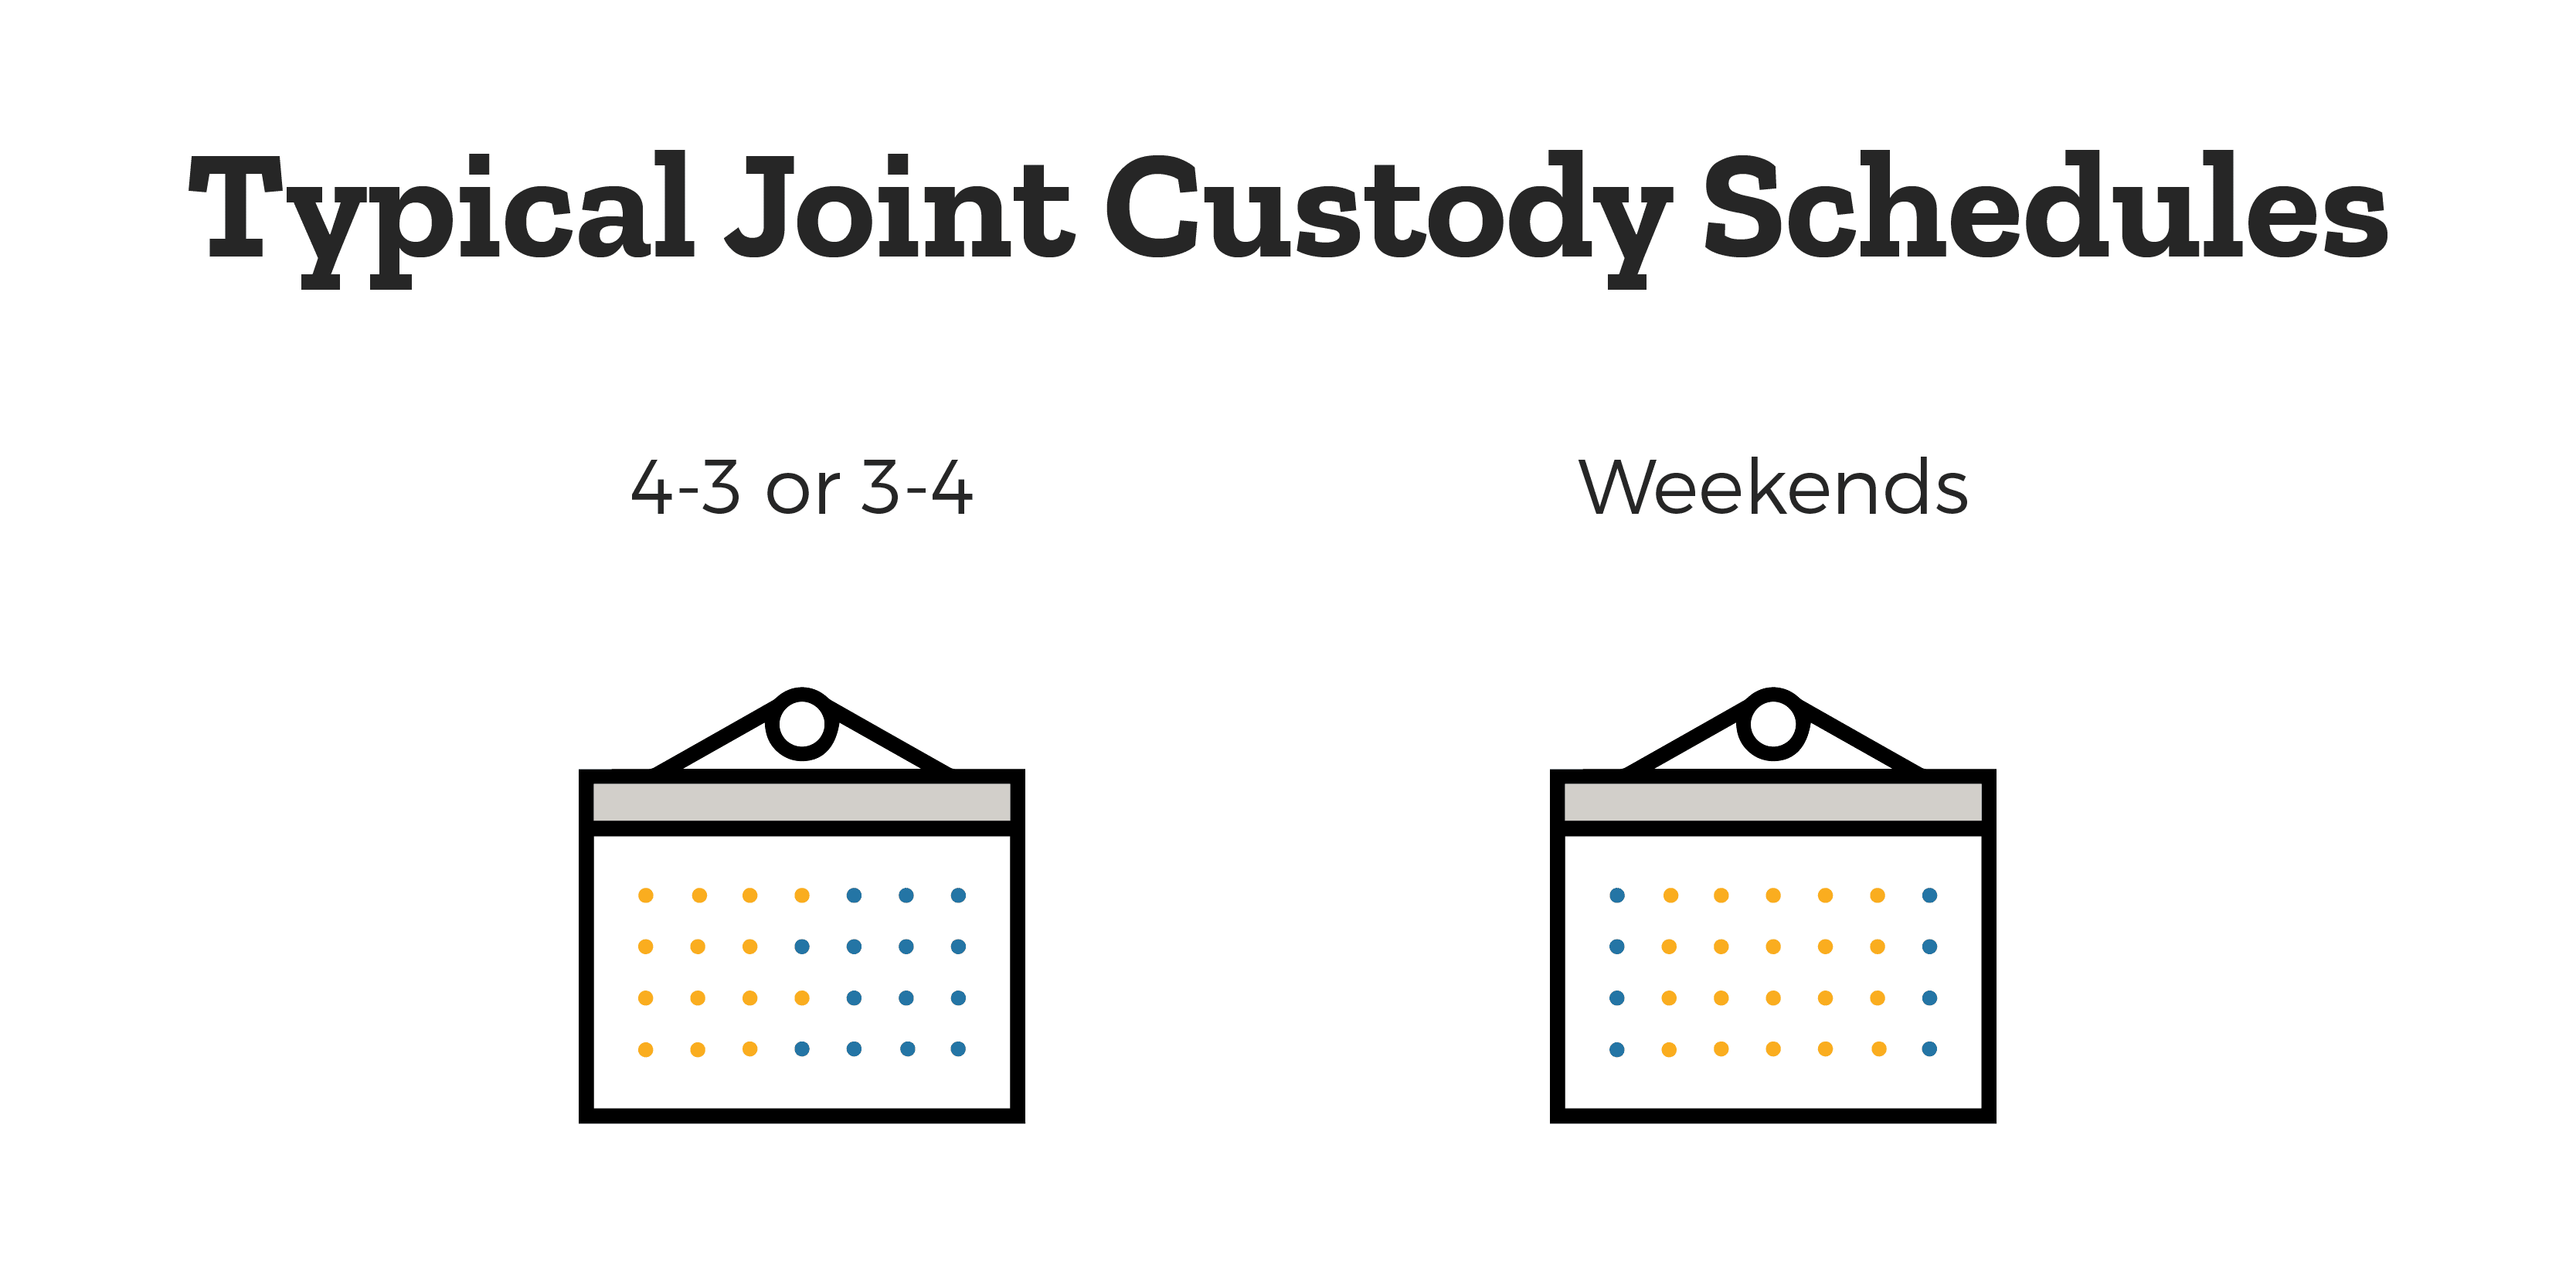 Typical Joint Custody Schedule - a graphic showing the “4-3/3-4 schedule” in which the child is with “parent A” for four days, “parent B” for three days, and in reverse order the following week. Other schedules show the noncustodial parent having visitation on most weekends.